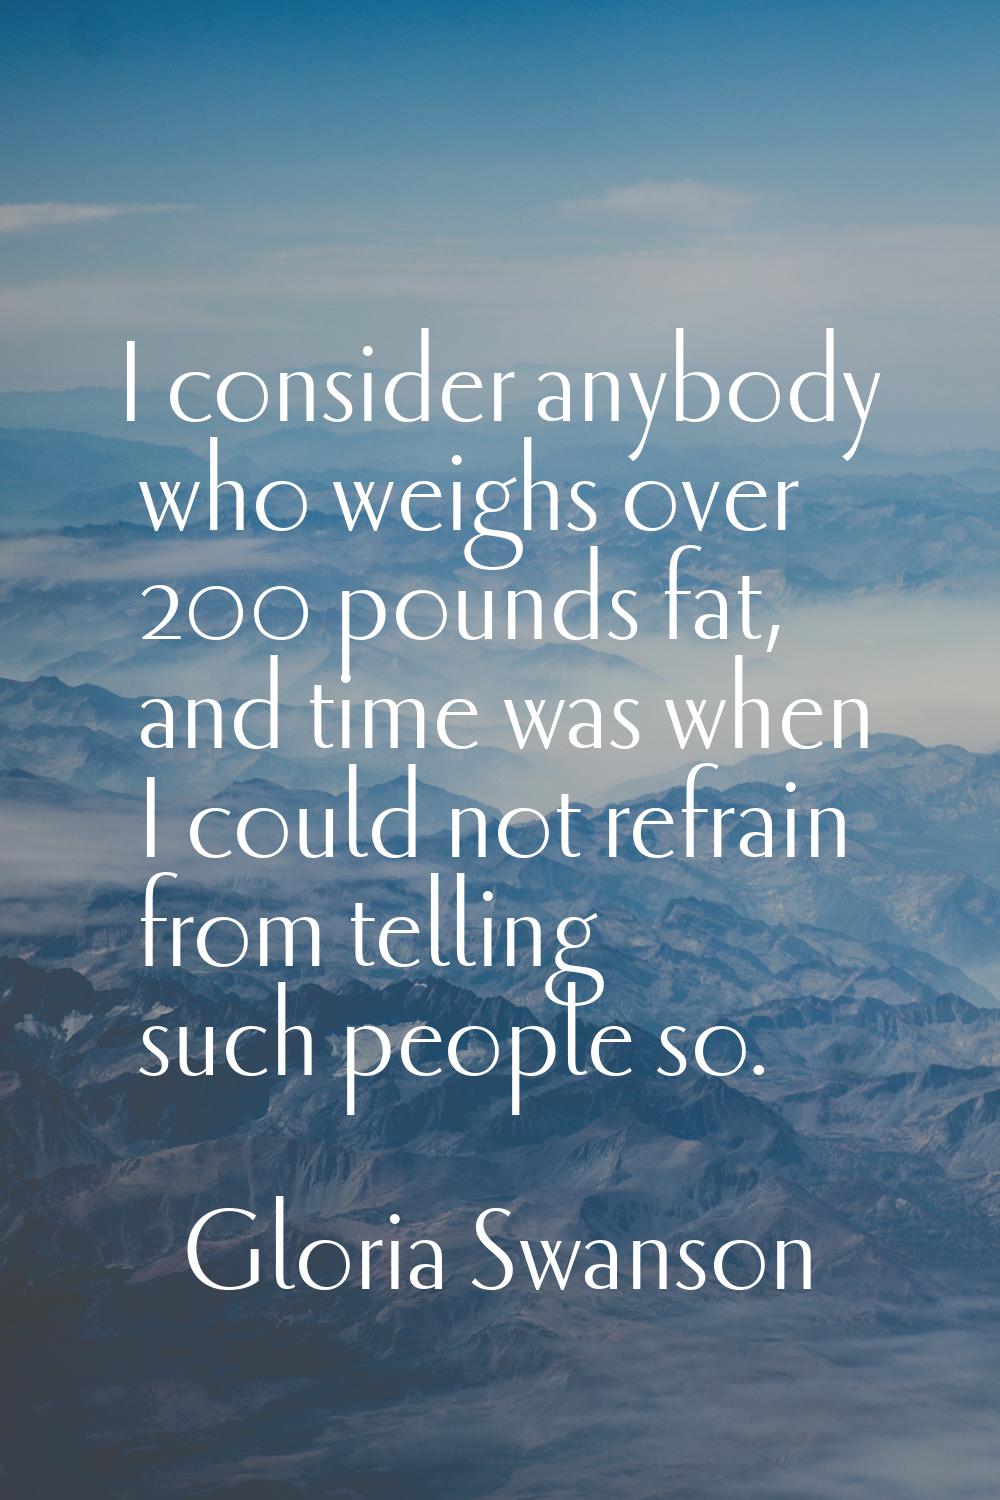 I consider anybody who weighs over 200 pounds fat, and time was when I could not refrain from telli